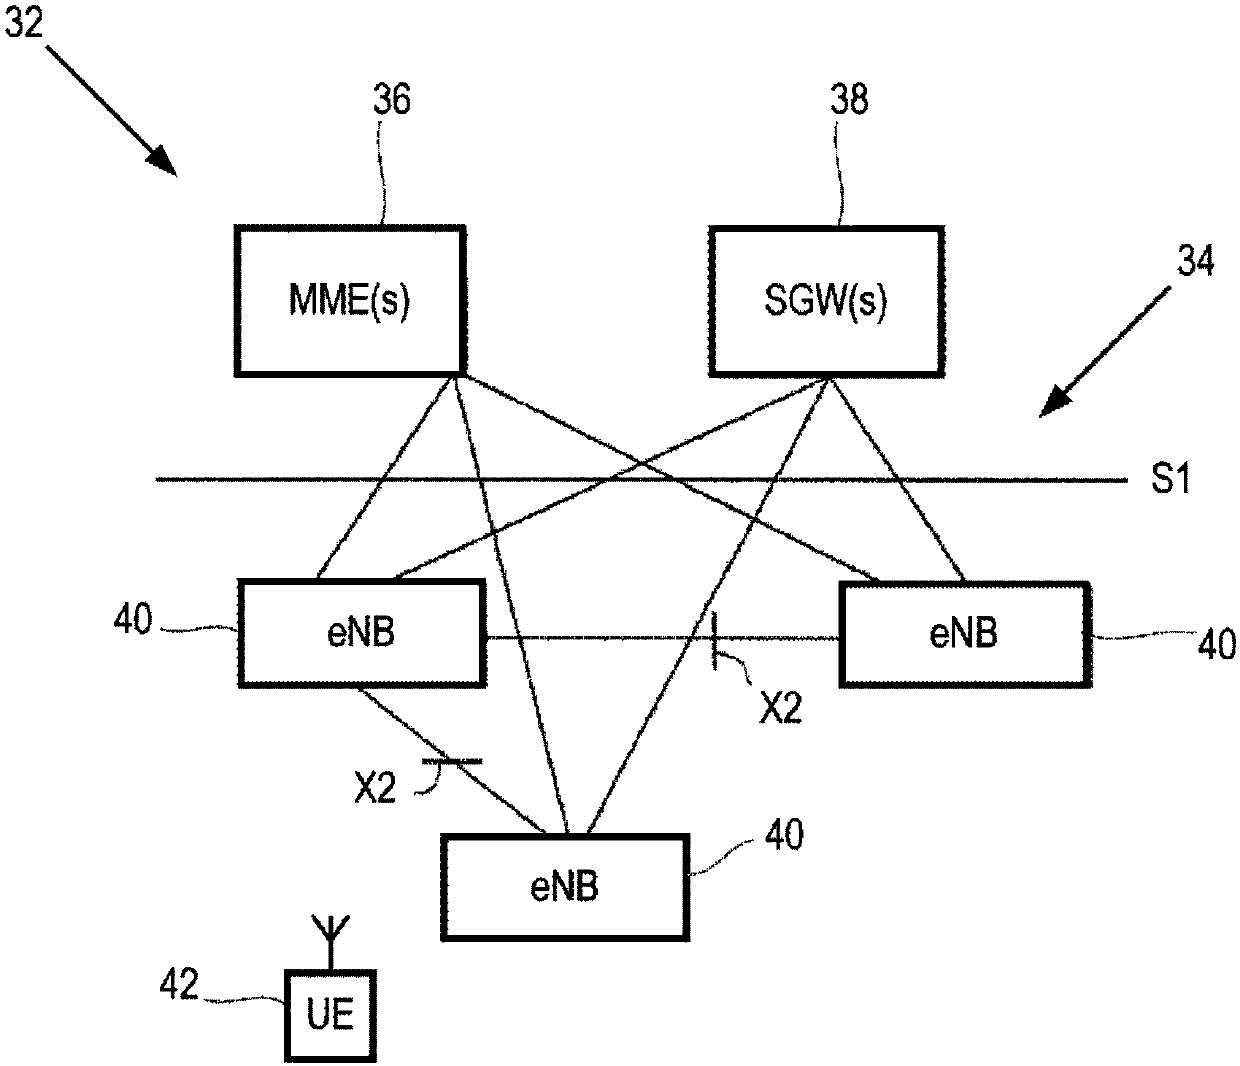 Radio access nodes and terminal devices in a communication network